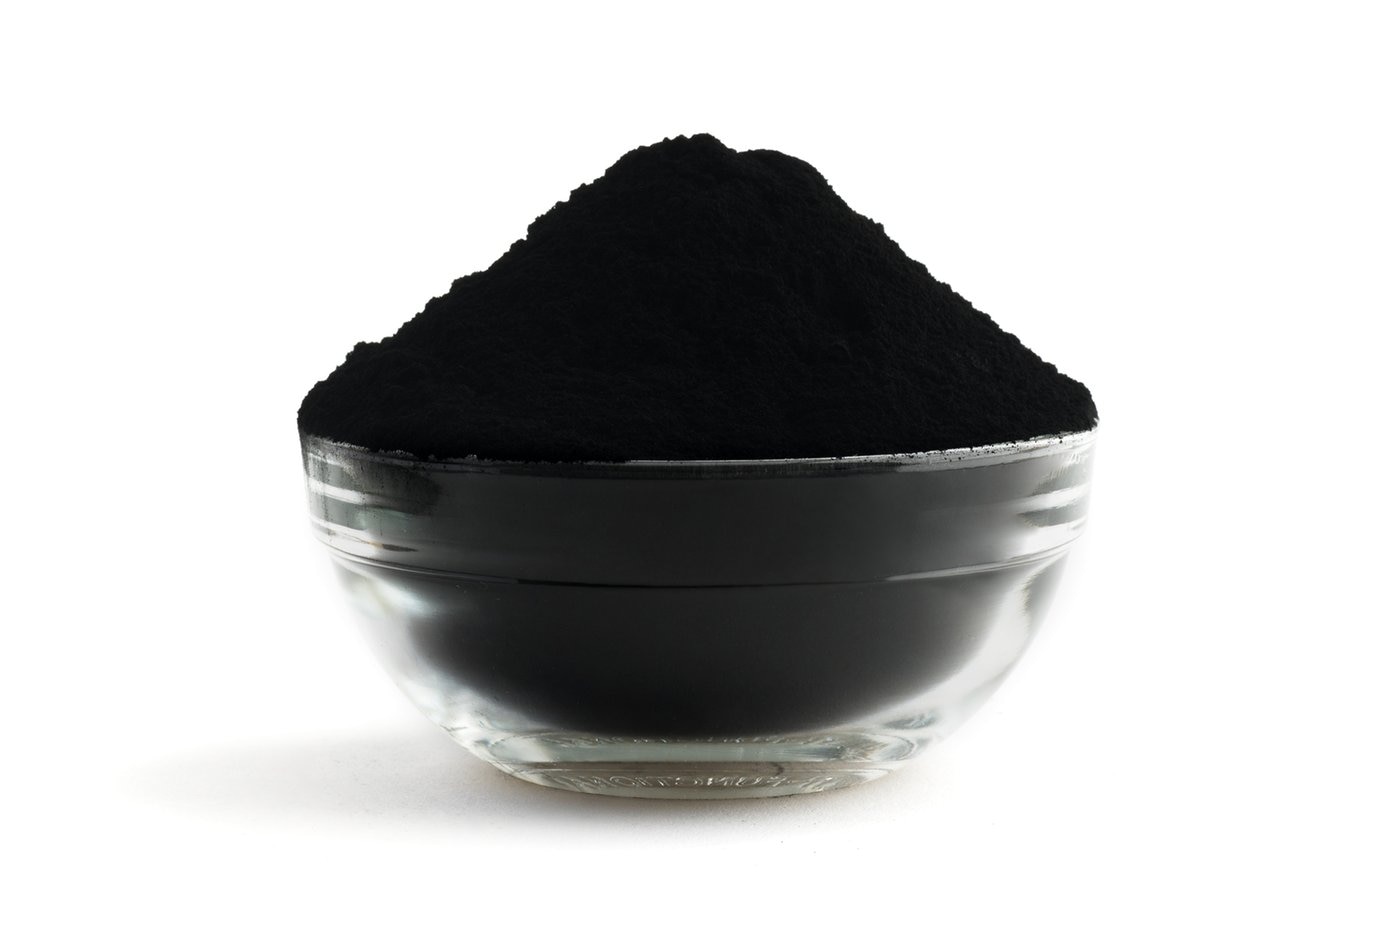 Activated Charcoal - How To Make It - YouTube